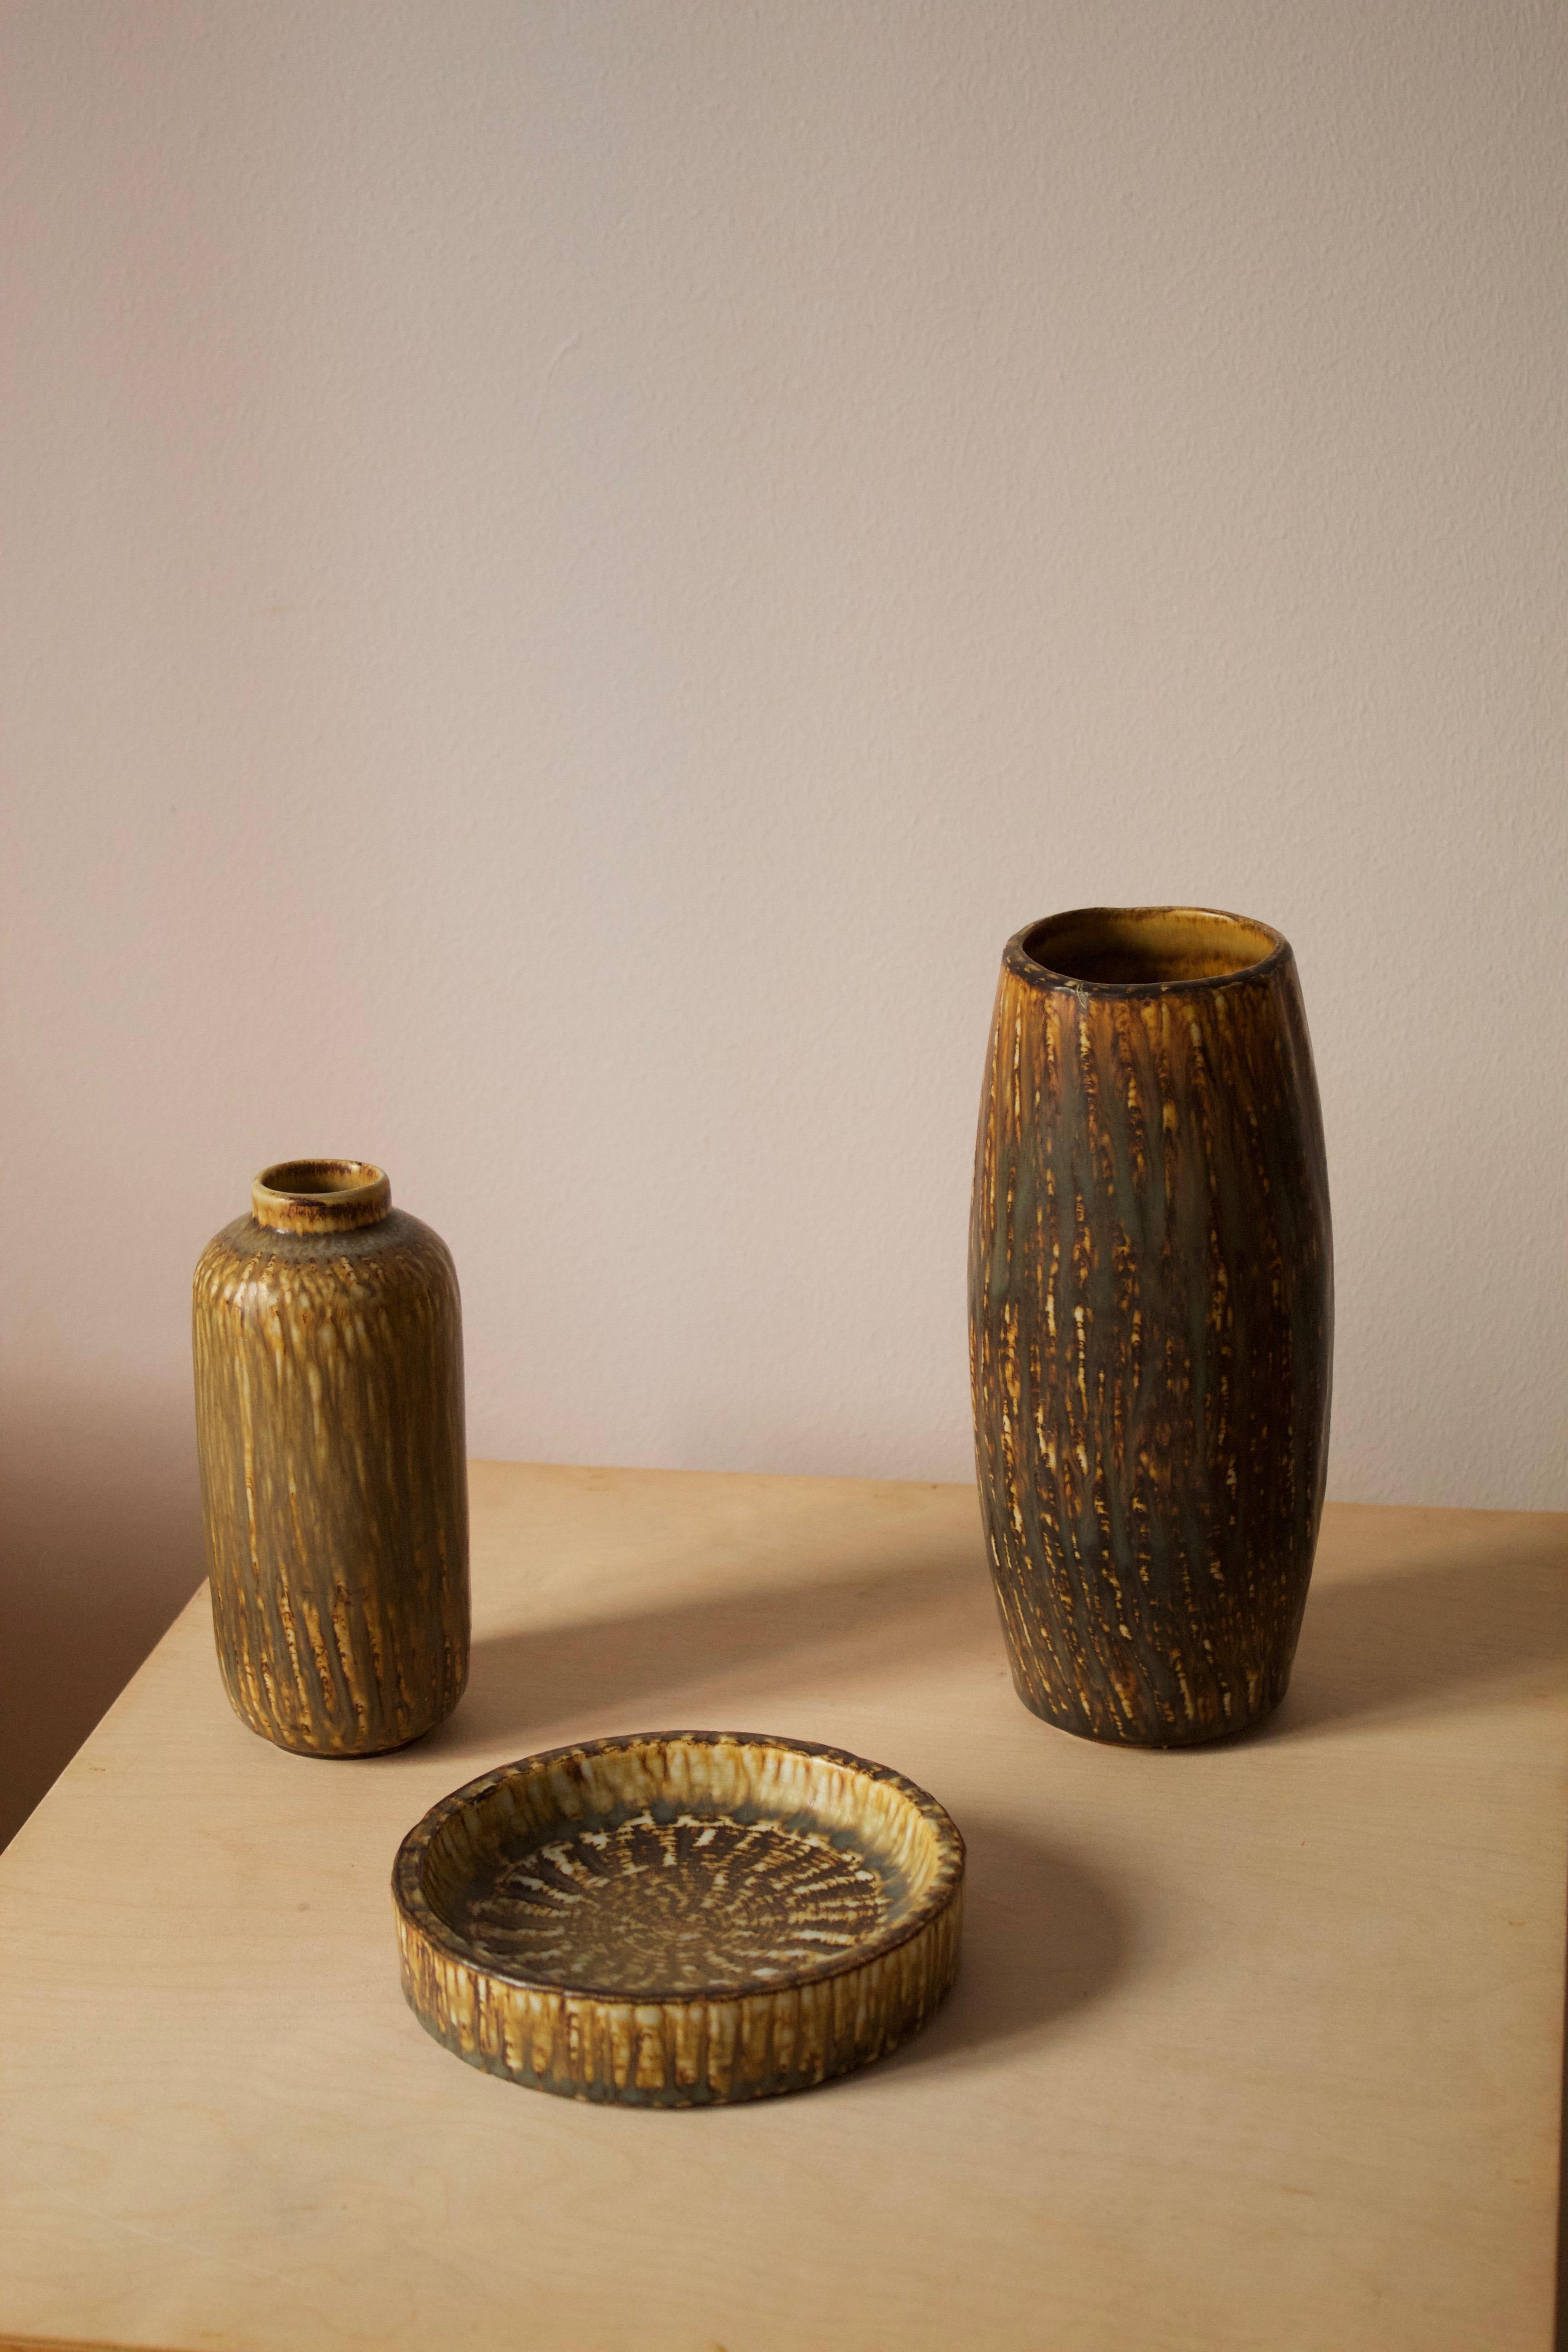 A set of two modernist vases or vessels and one dish produced by Rörstrand, Sweden, 1950s. Designed by Gunnar Nylund, (Swedish, 1914-1997). Signed.

Nylund served as artistic director at Rörstrands, where he worked 1931-1955. Prior to his work at